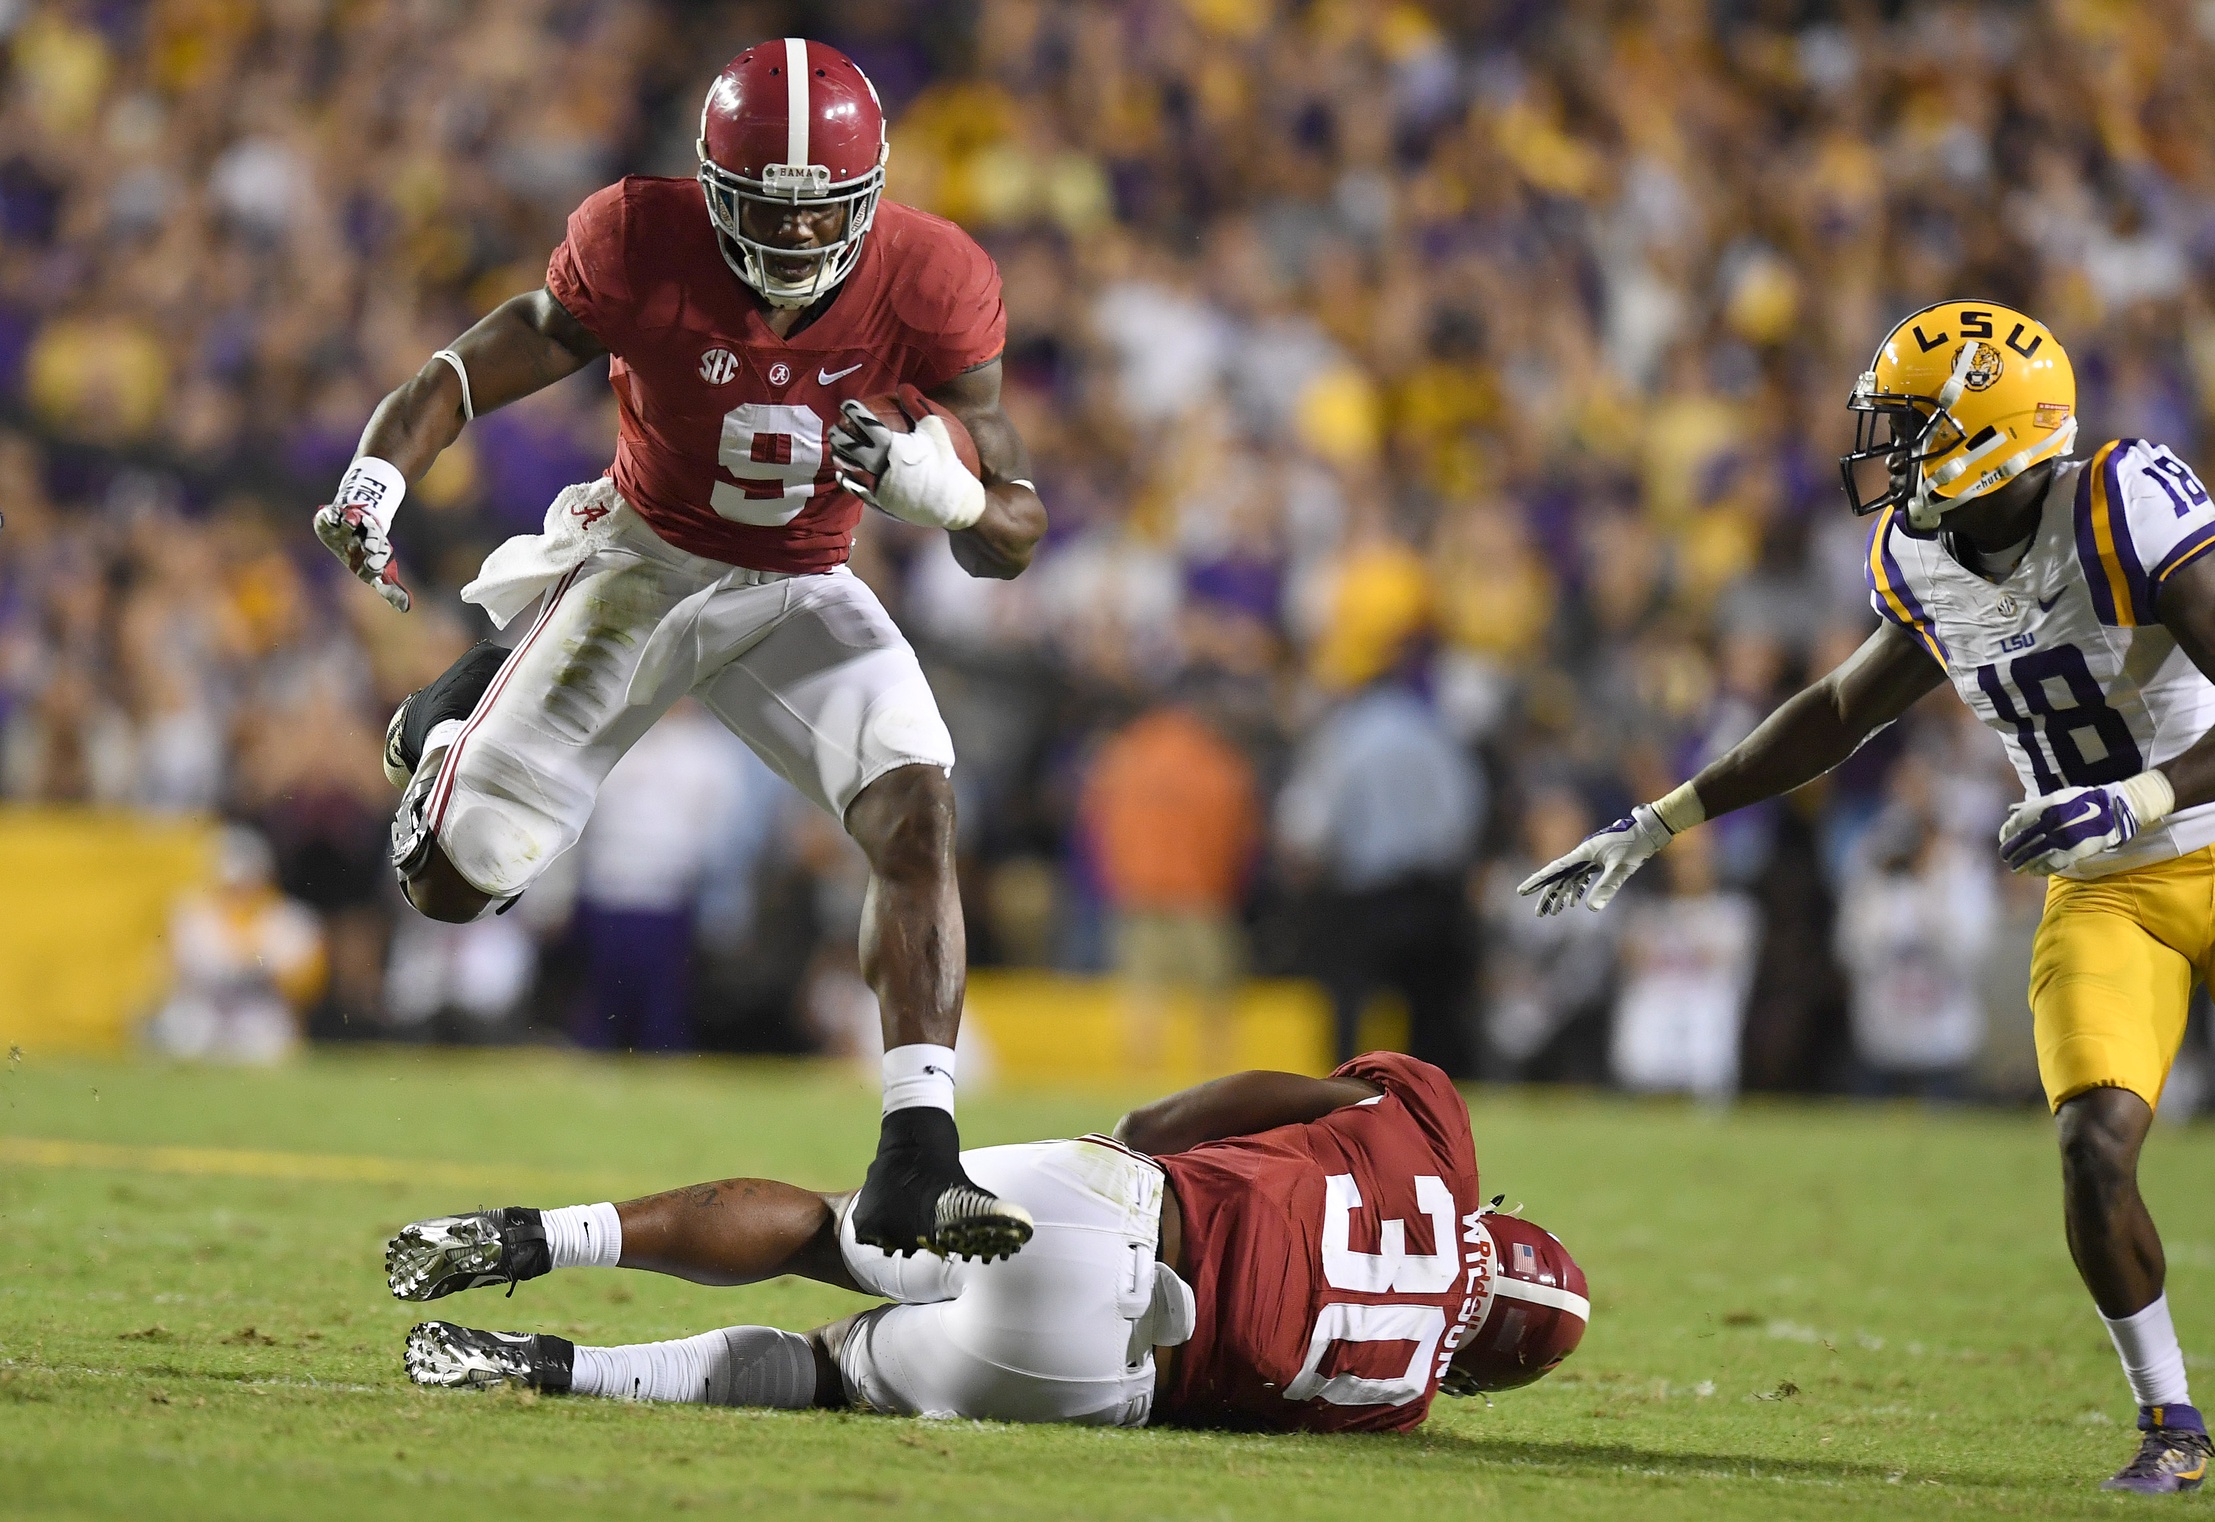 Nov 5, 2016; Baton Rouge, LA, USA; Alabama Crimson Tide running back Bo Scarbrough (9) leaps over a teammate as he scrambles up the field against the LSU Tigers during the third quarter at Tiger Stadium. Alabama defeated LSU 10-0. Mandatory Credit: John David Mercer-USA TODAY Sports